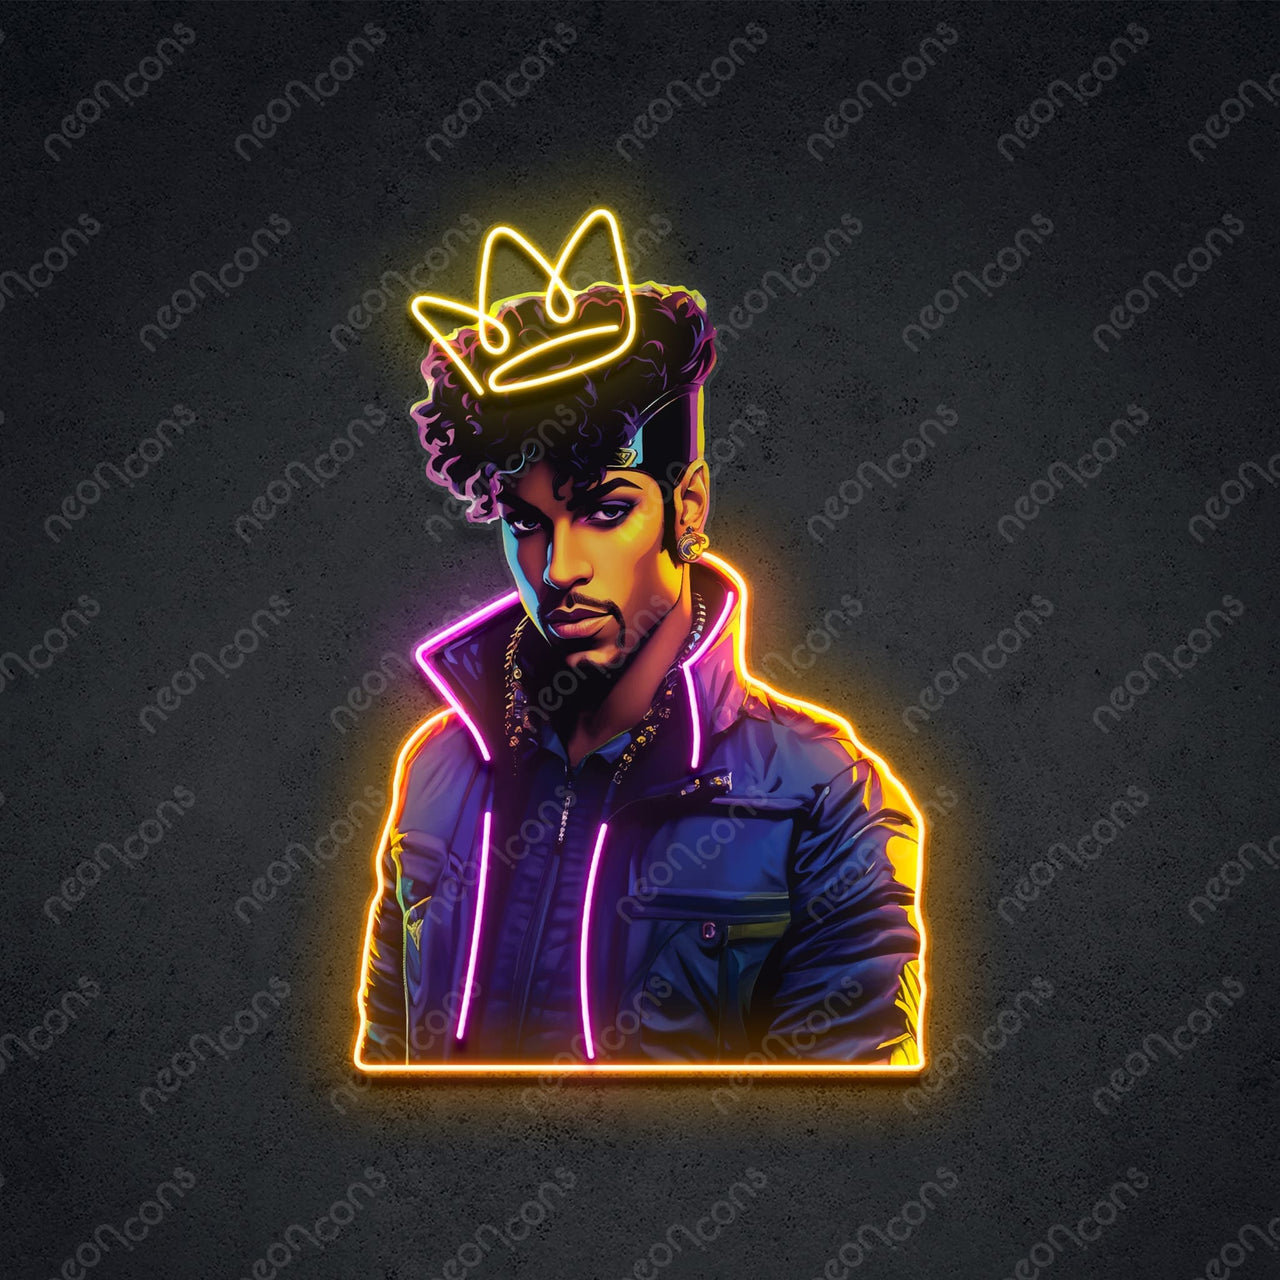 "Crowned" Neon x Acrylic Artwork 60cm (2ft) / Neon x Acrylic Artwork by Neon Icons